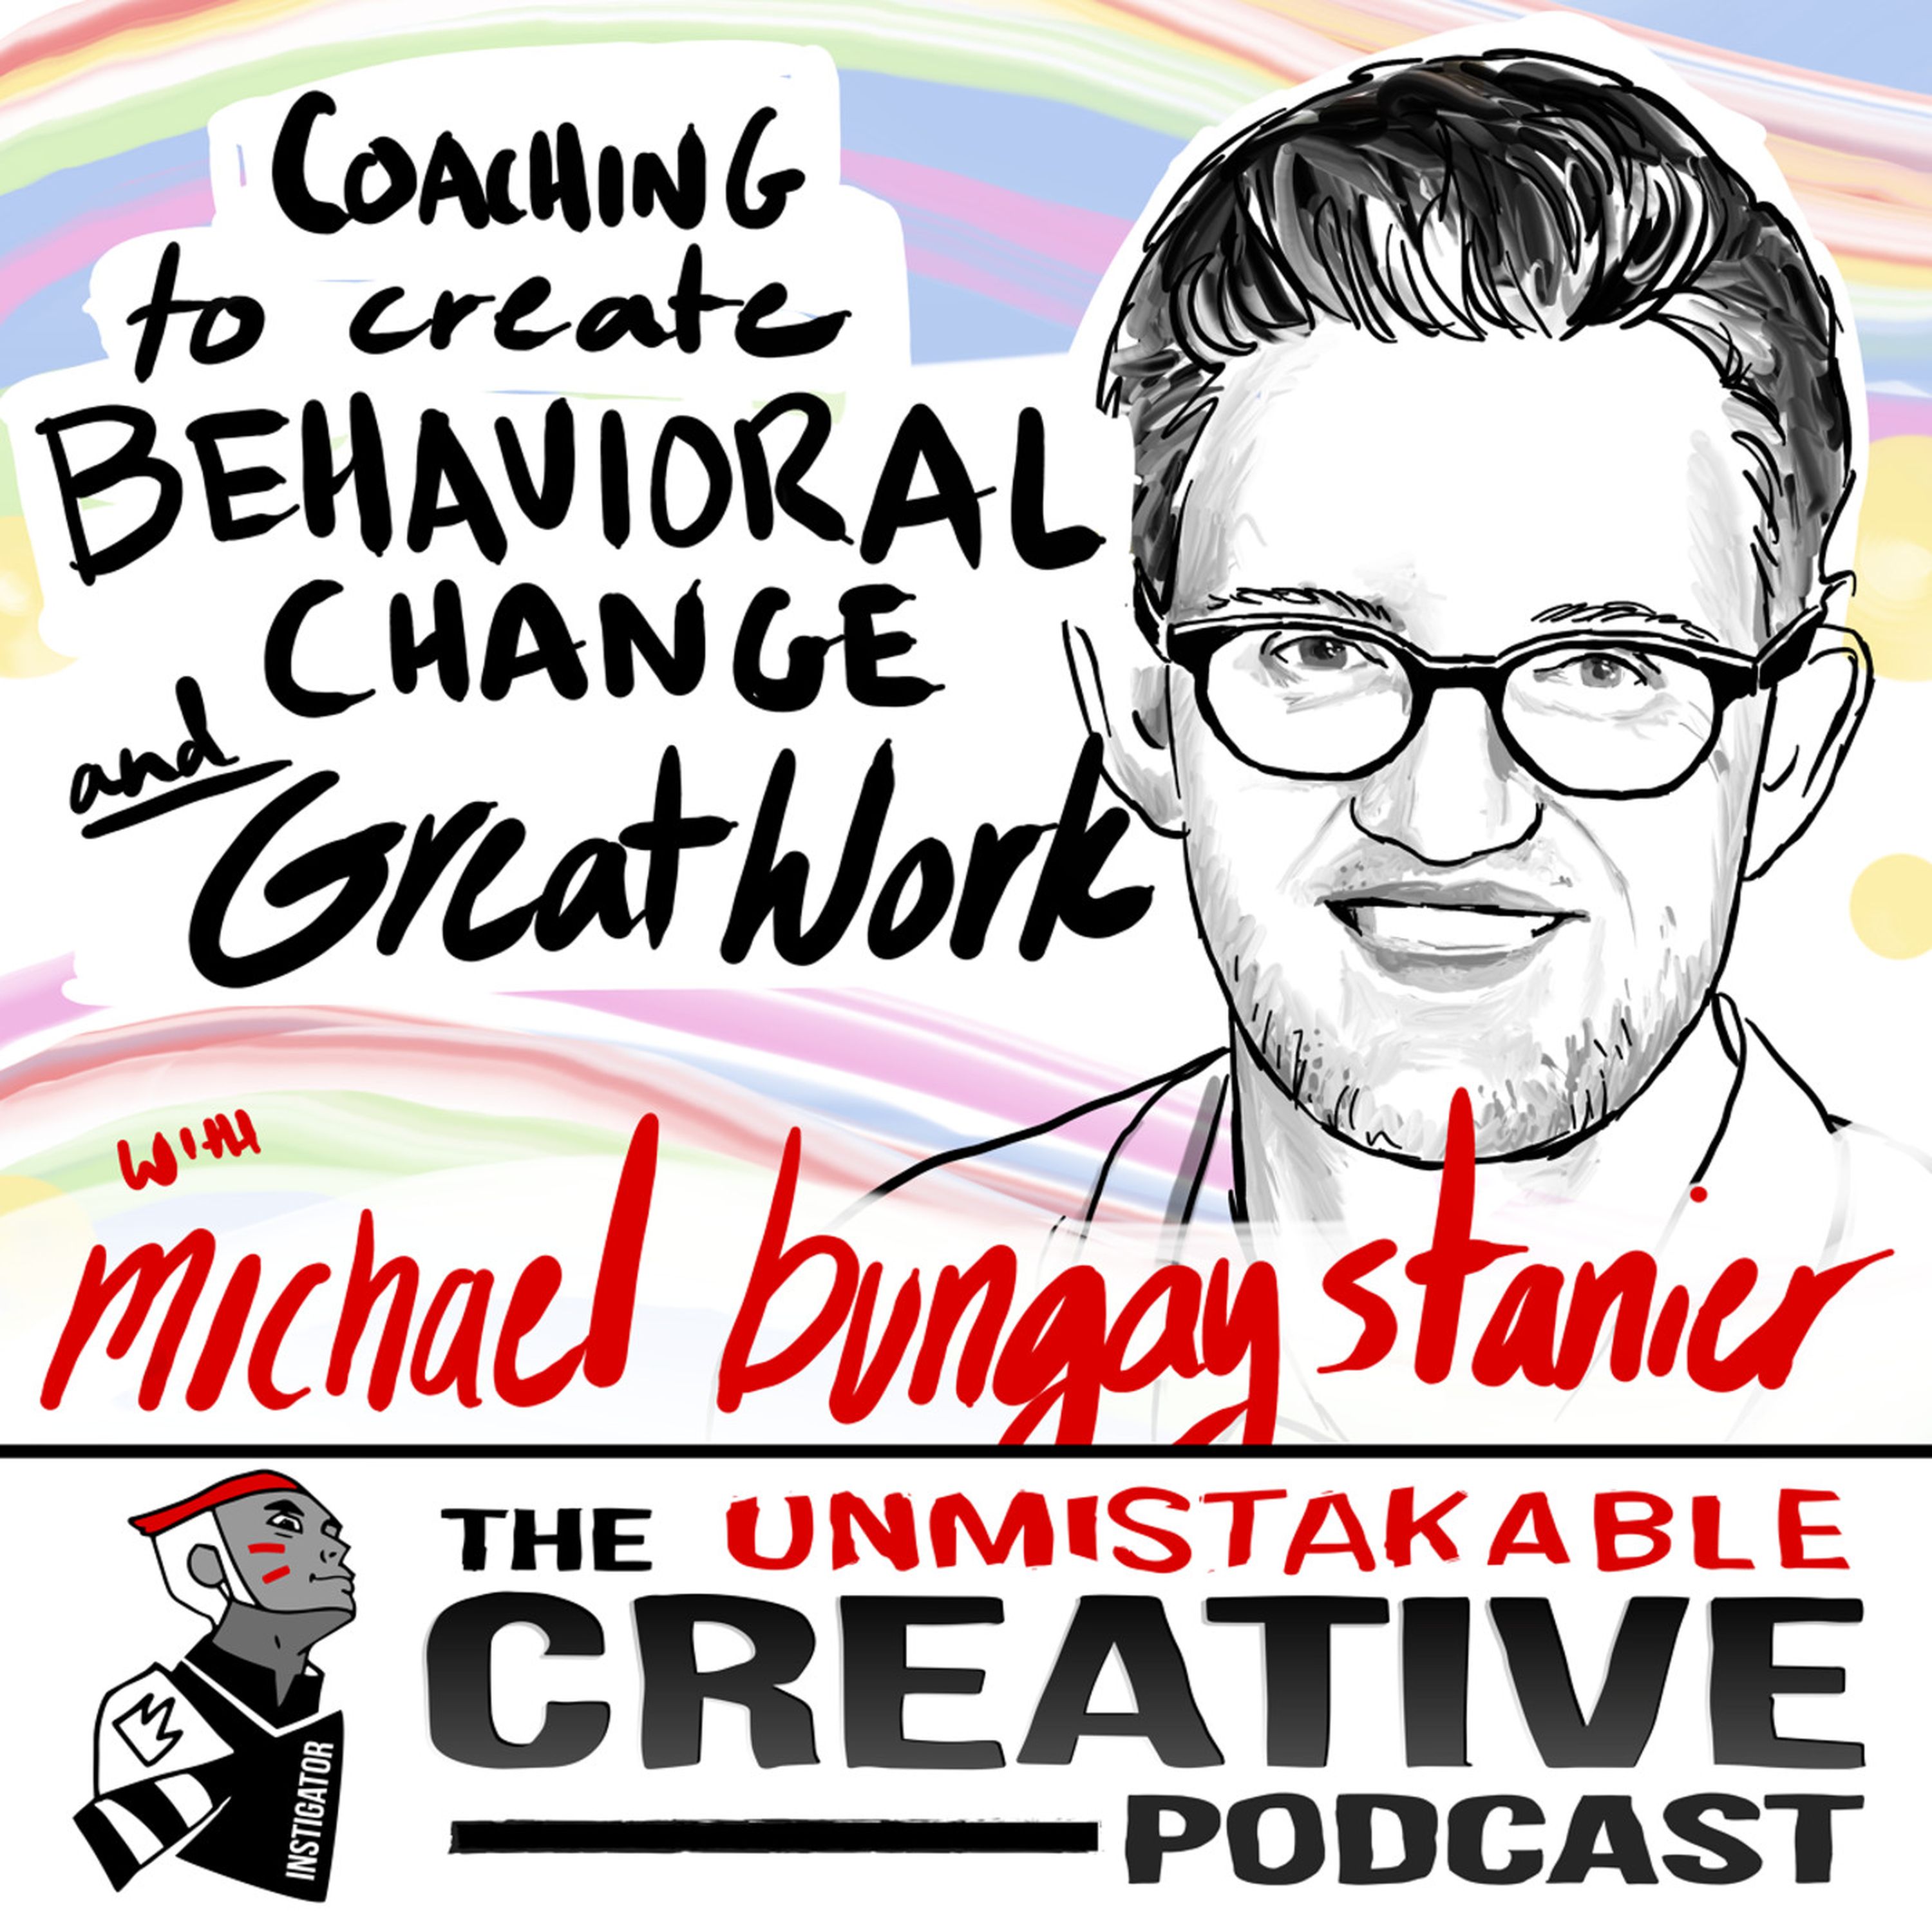 Coaching to Create Behavioral Change and Great Work with Michael Bungay Stanier Image